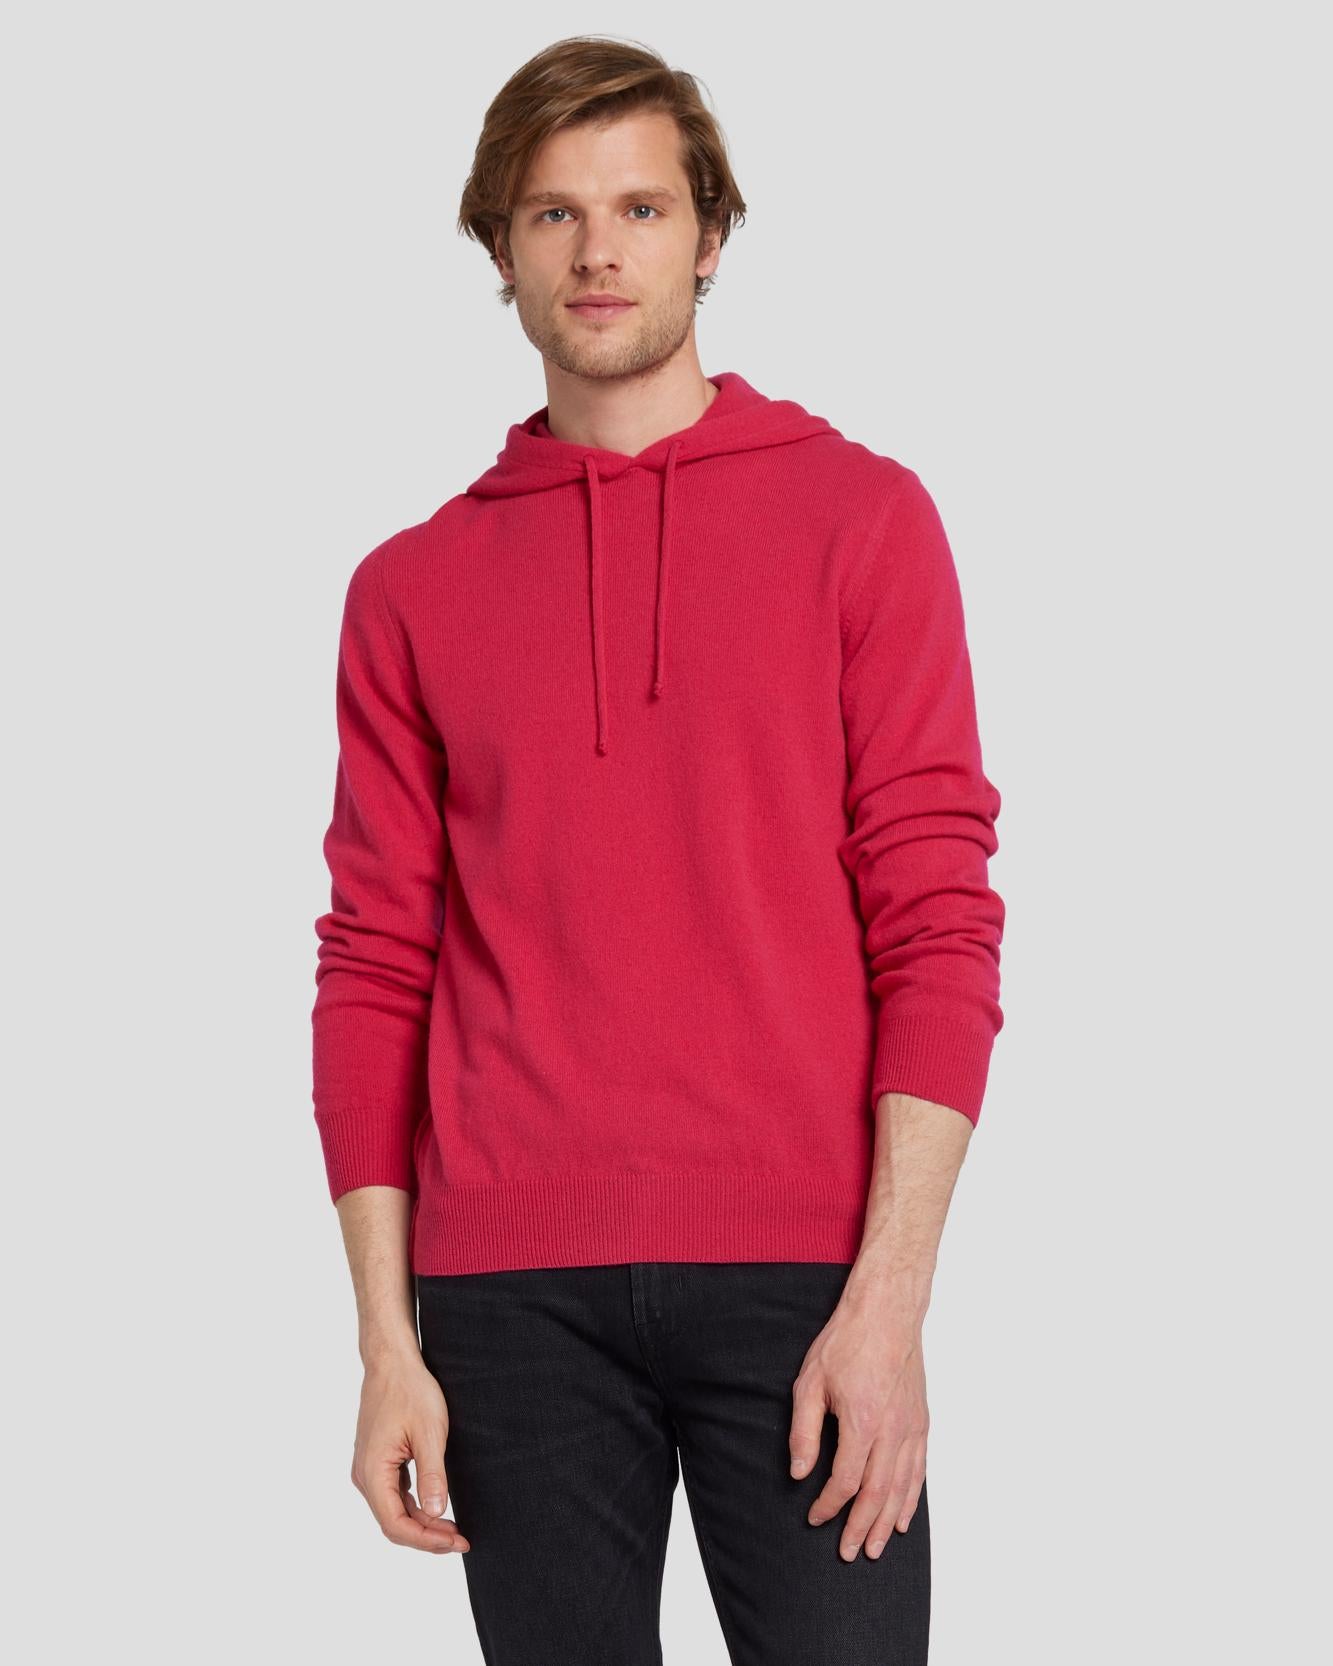 Cashmere Hoodie in Raspberry | 7 For All Mankind